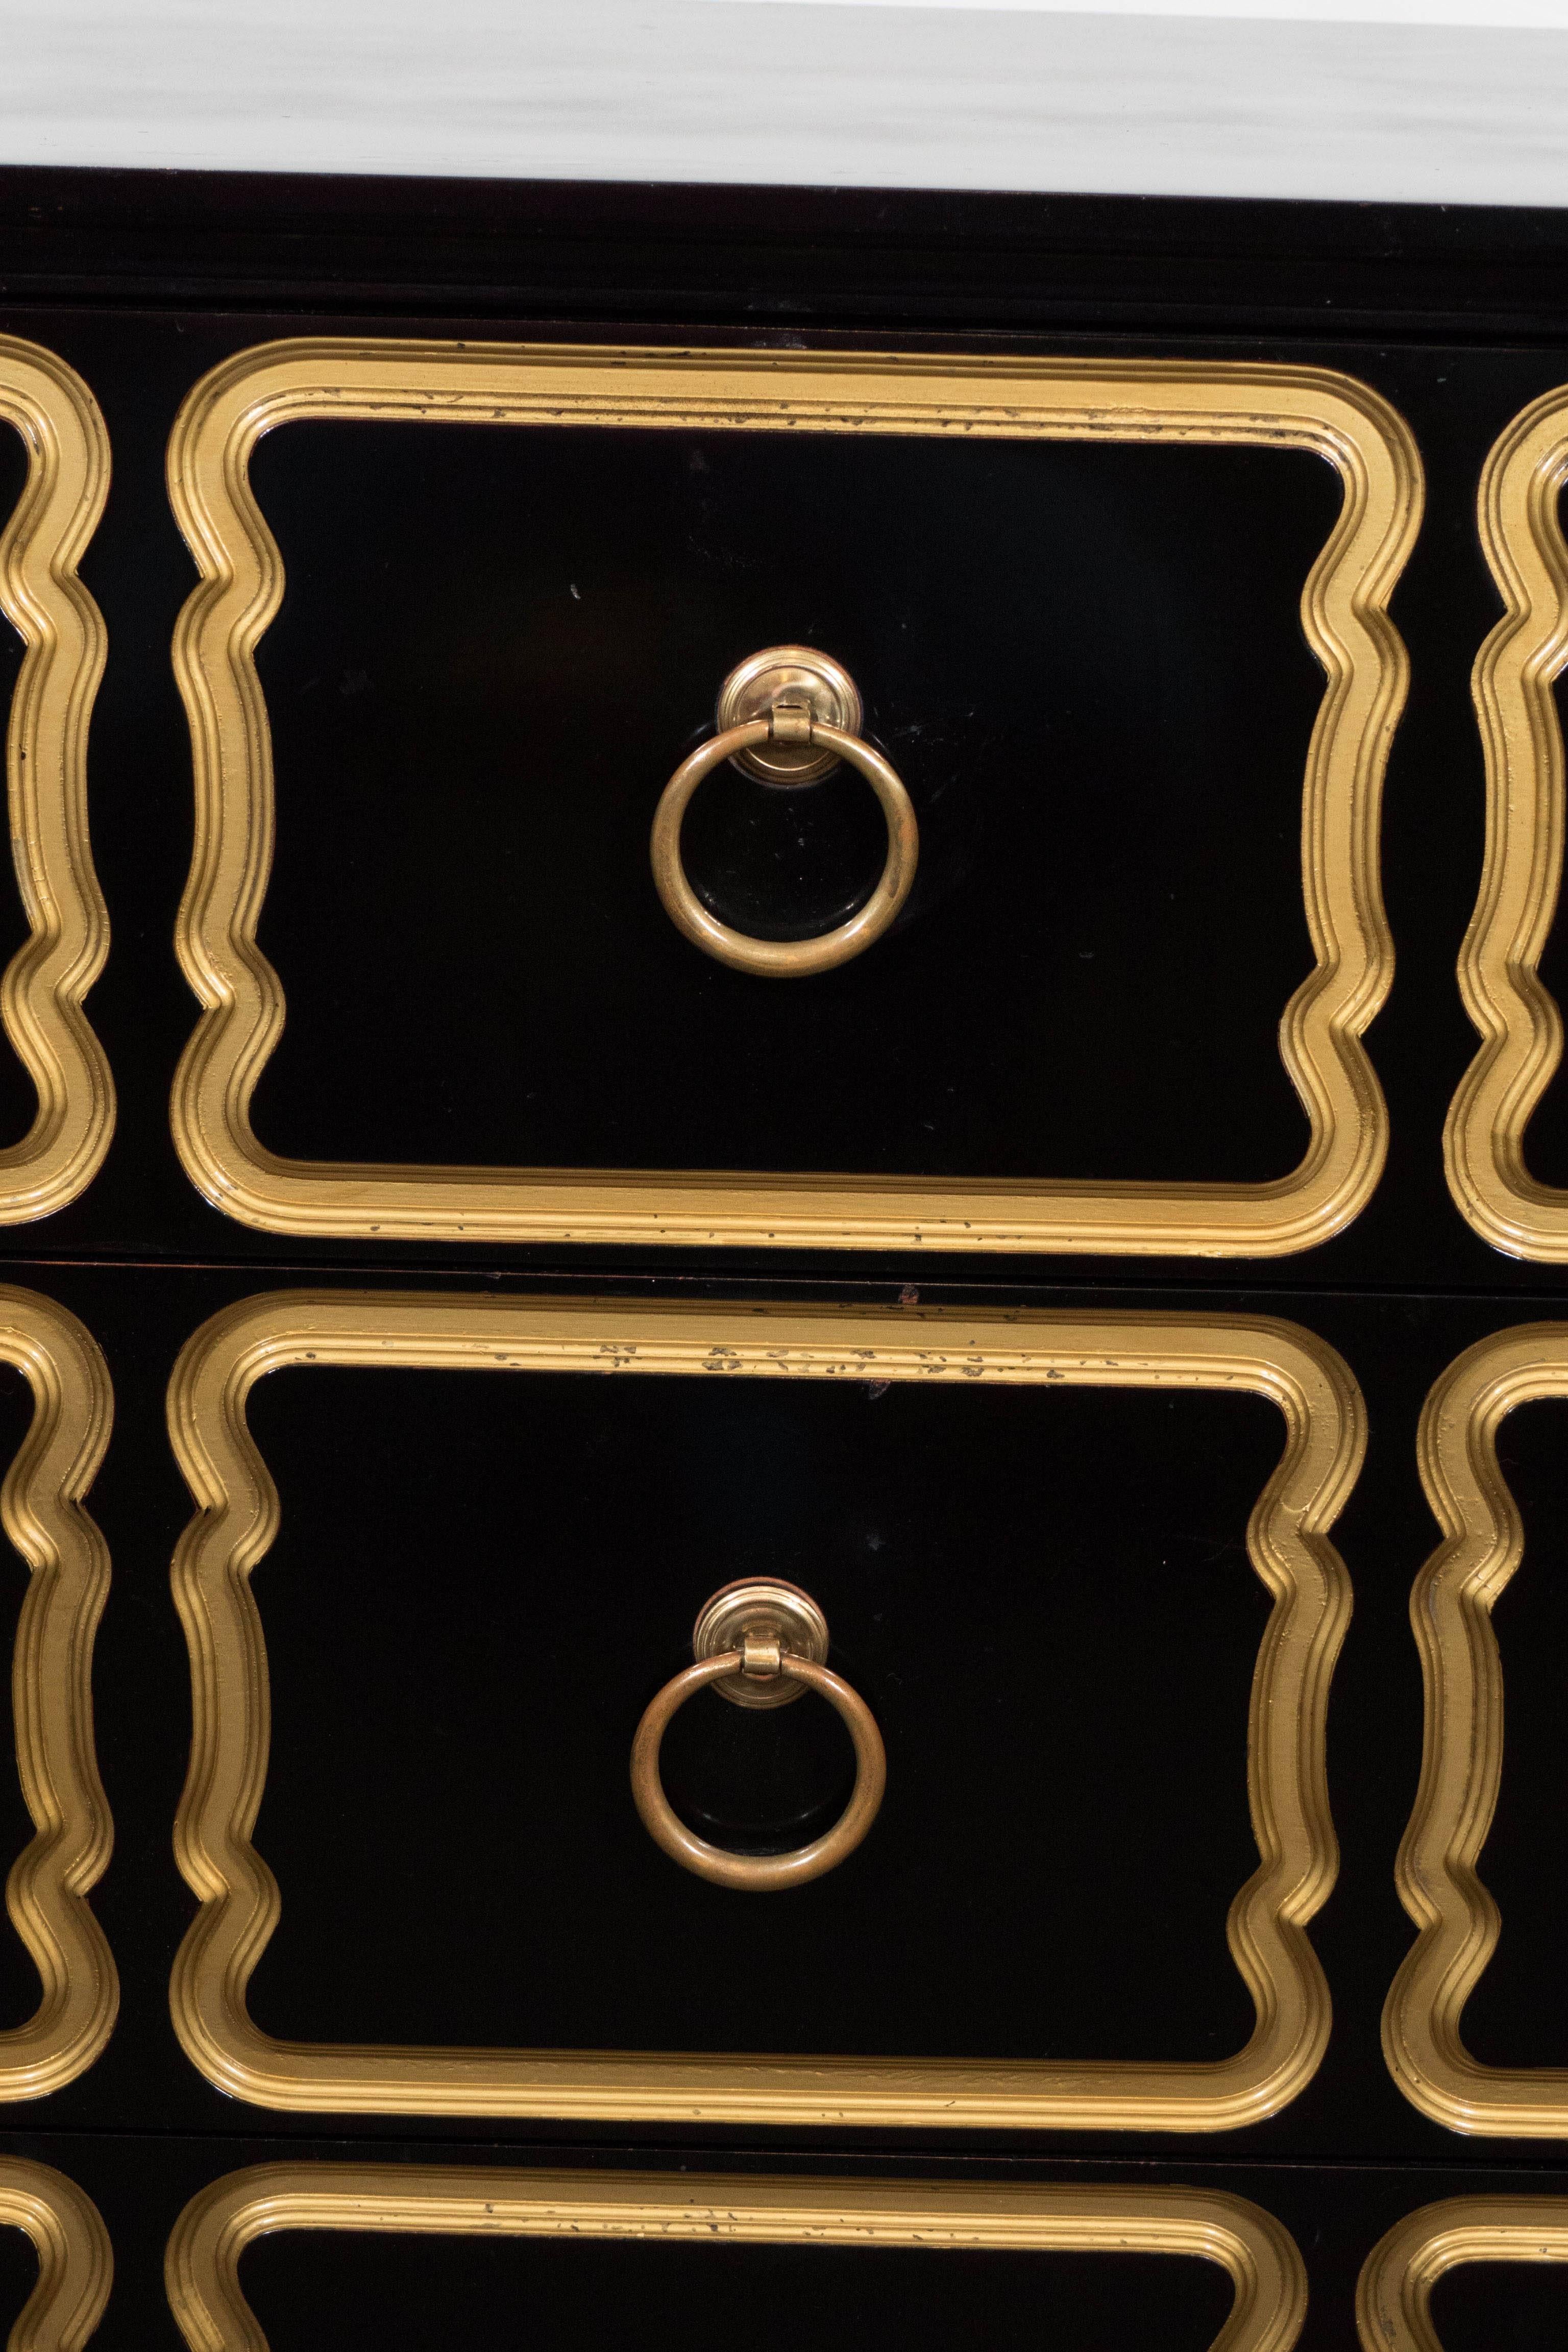 This pair of black lacquer Espana chests by designer Dorothy Draper, circa 1950s, includes three drawers with three brass ring handles, each bordered by beveled gilt trim. The chests remain in overall good vintage condition, with age appropriate